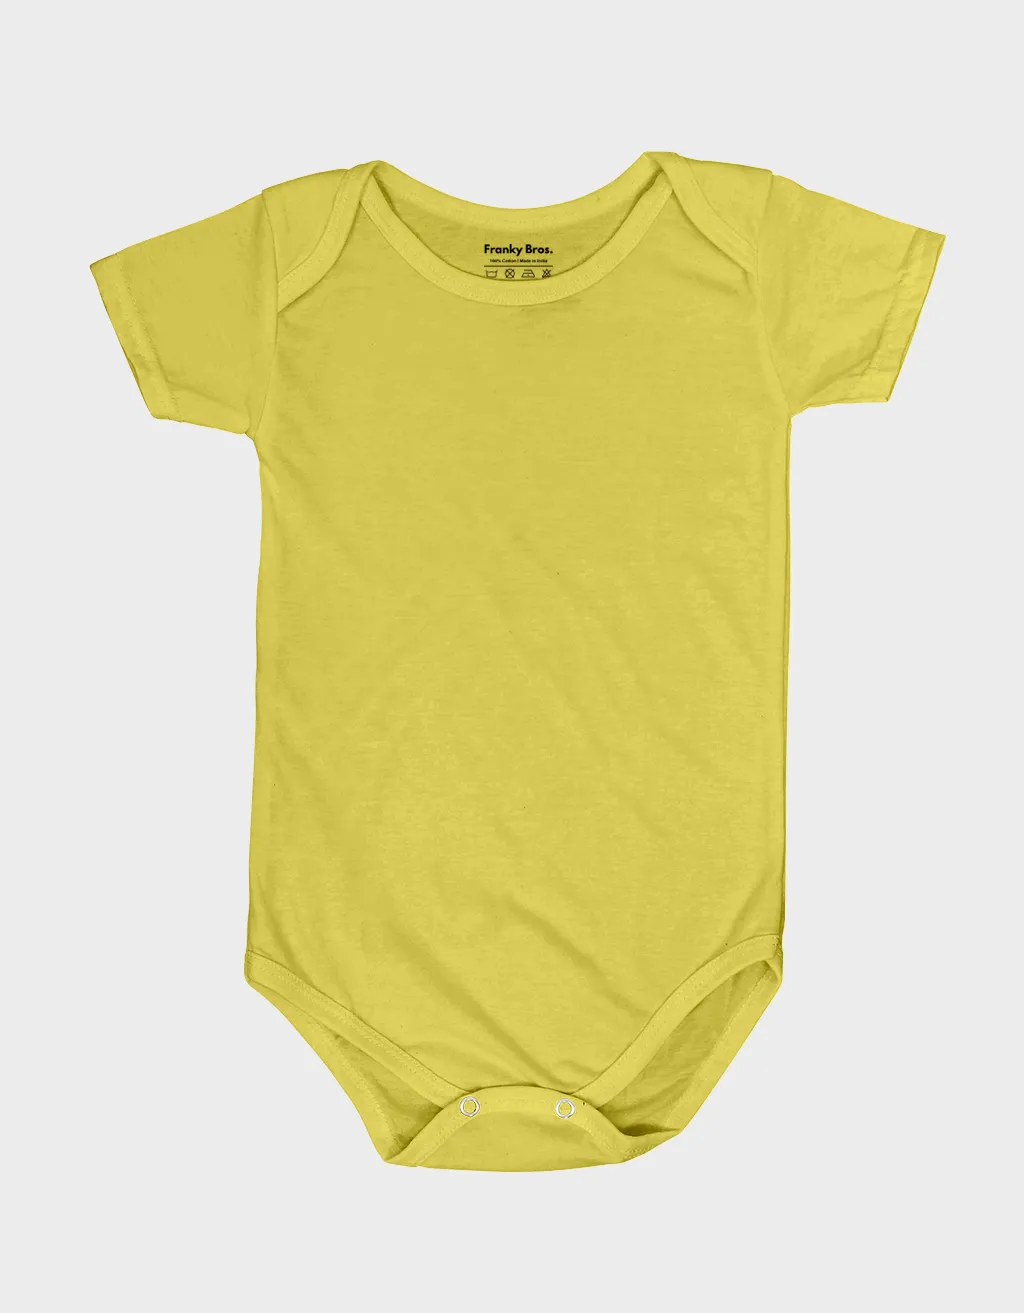 yellow onesies for babies baby clothes online in india